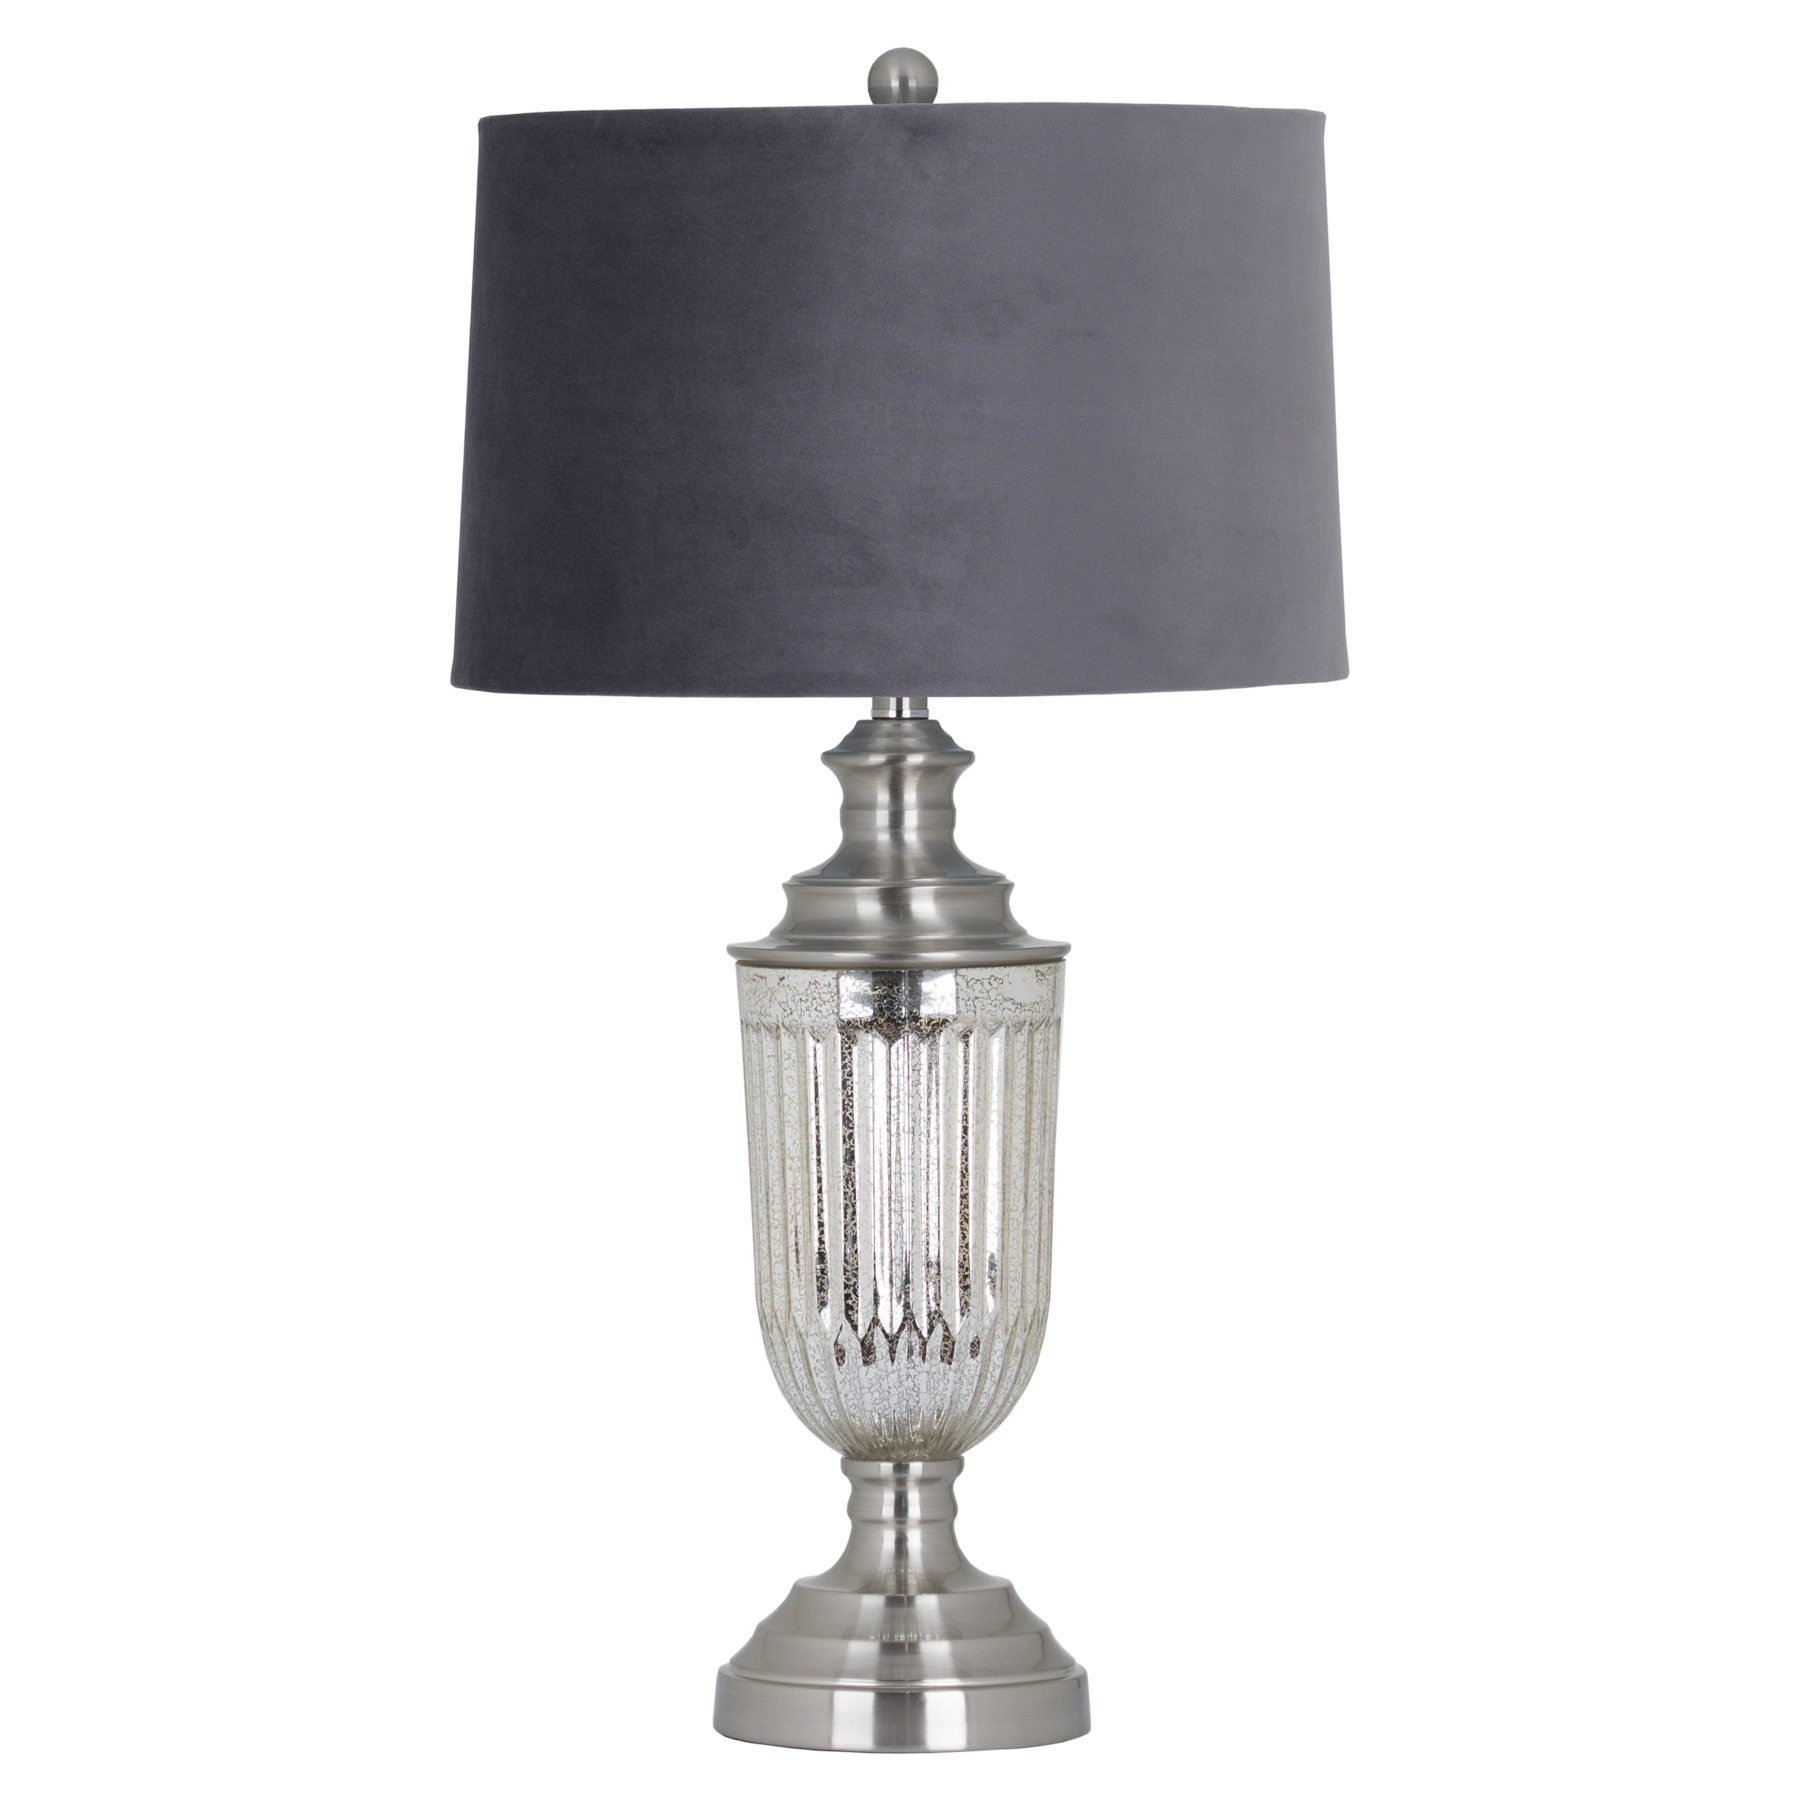 Penelope Glass Table Lamp - Image 1